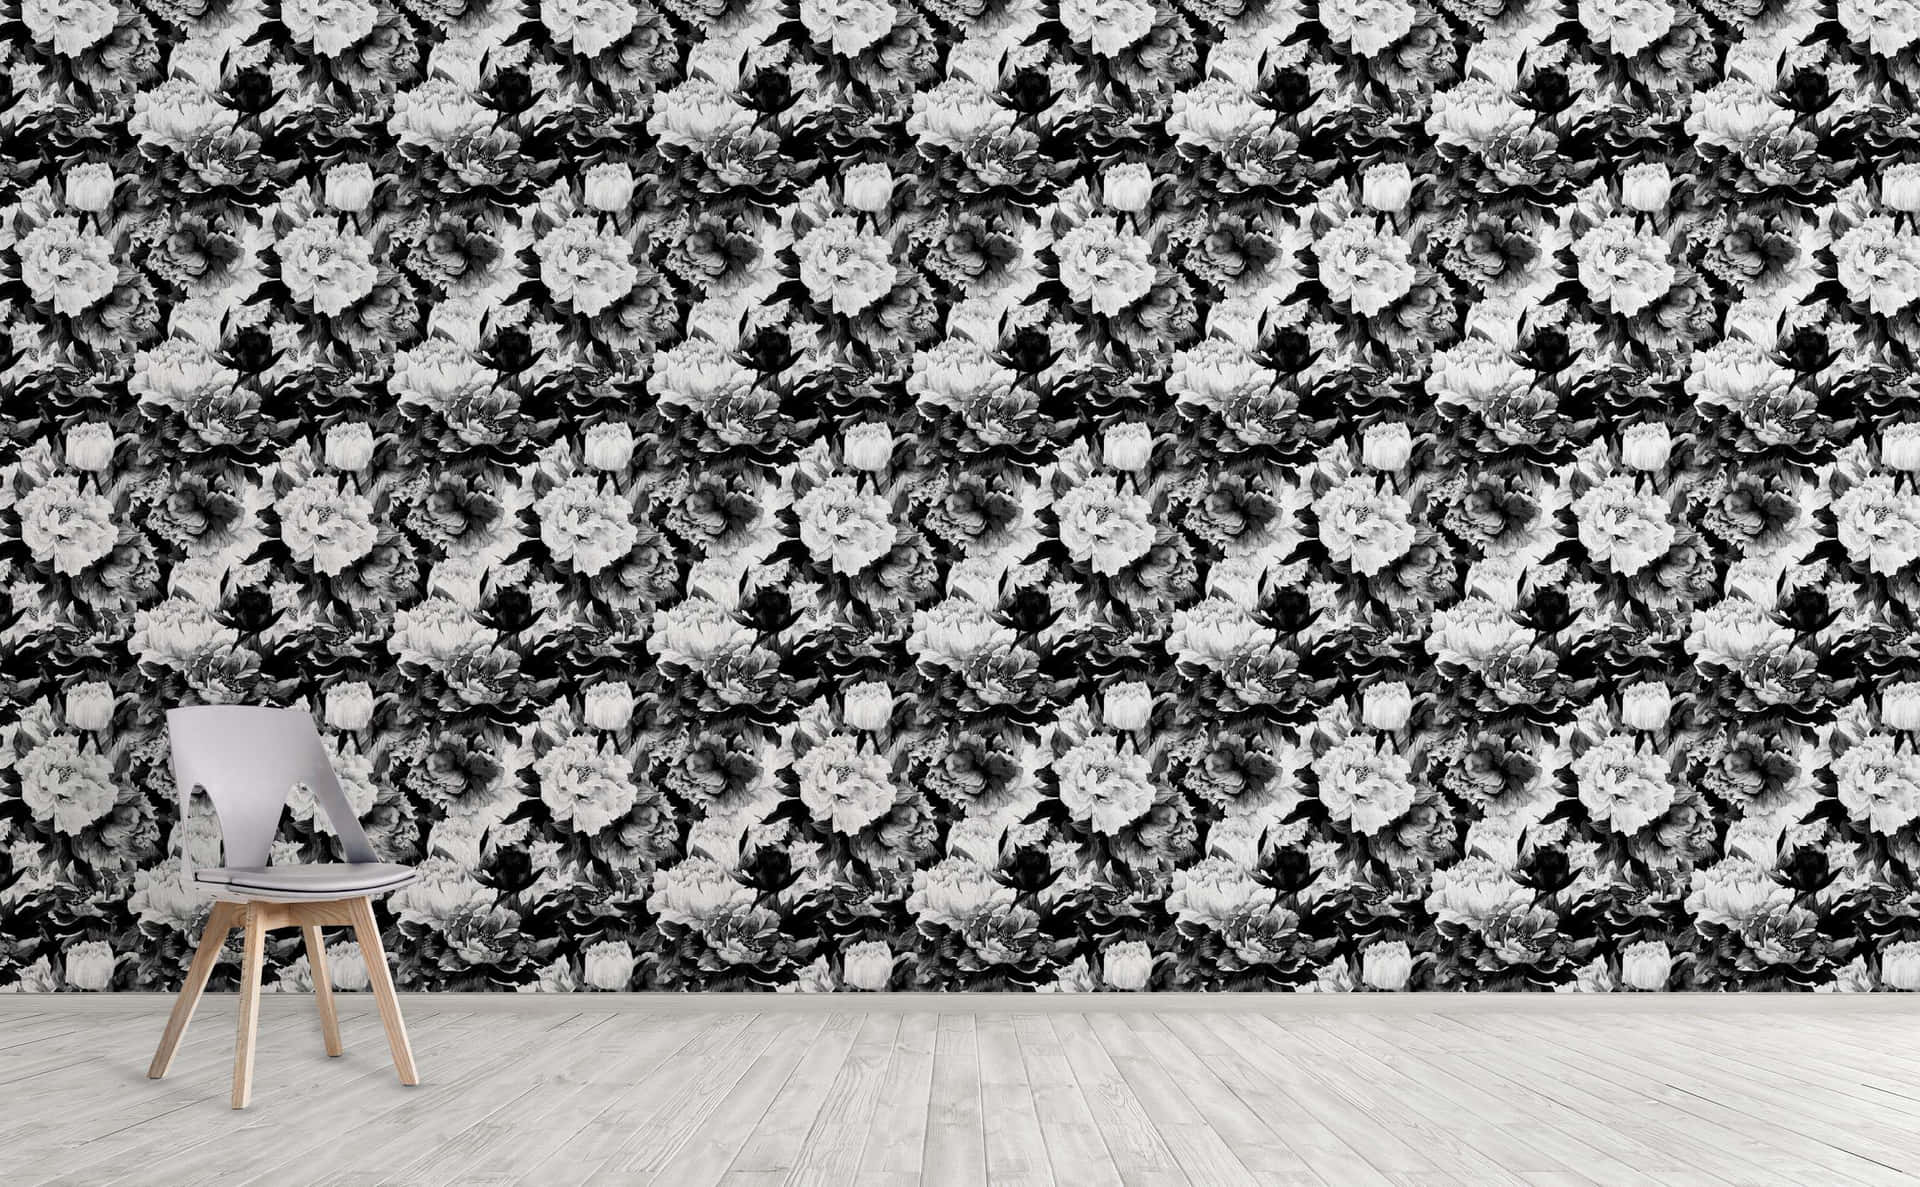 Abstract black and white pattern to add texture and depth to any décor. Wallpaper